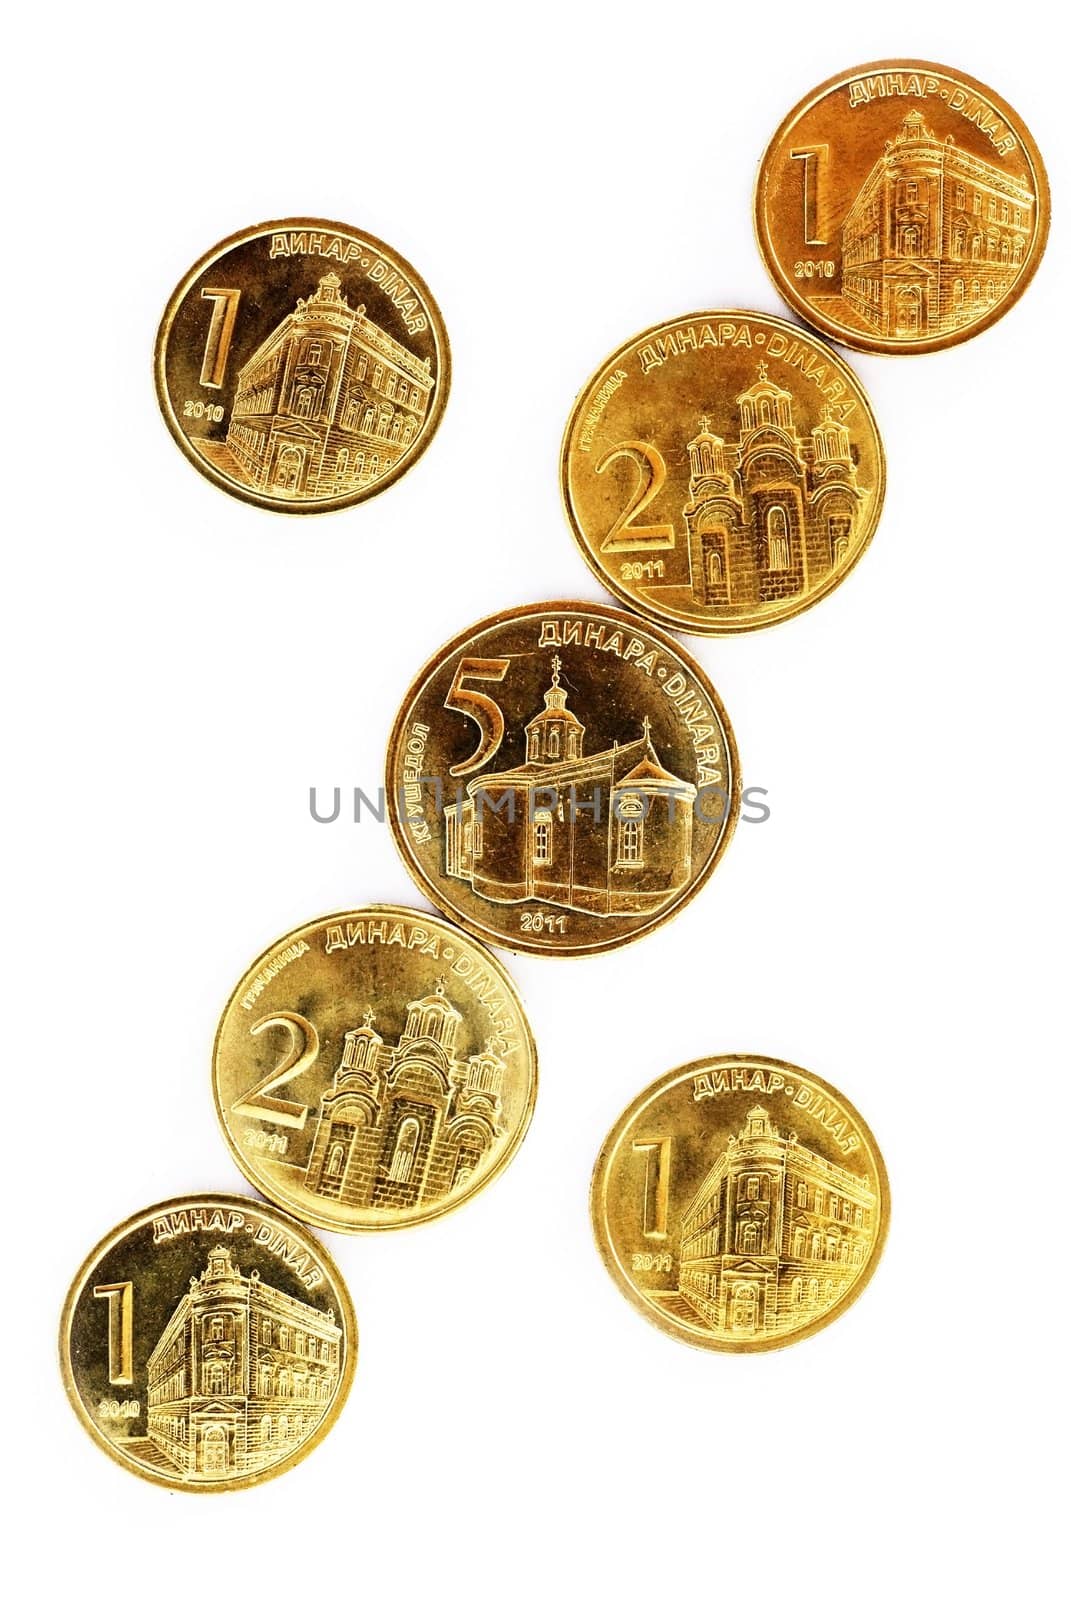 Serbian dinar coins by simply